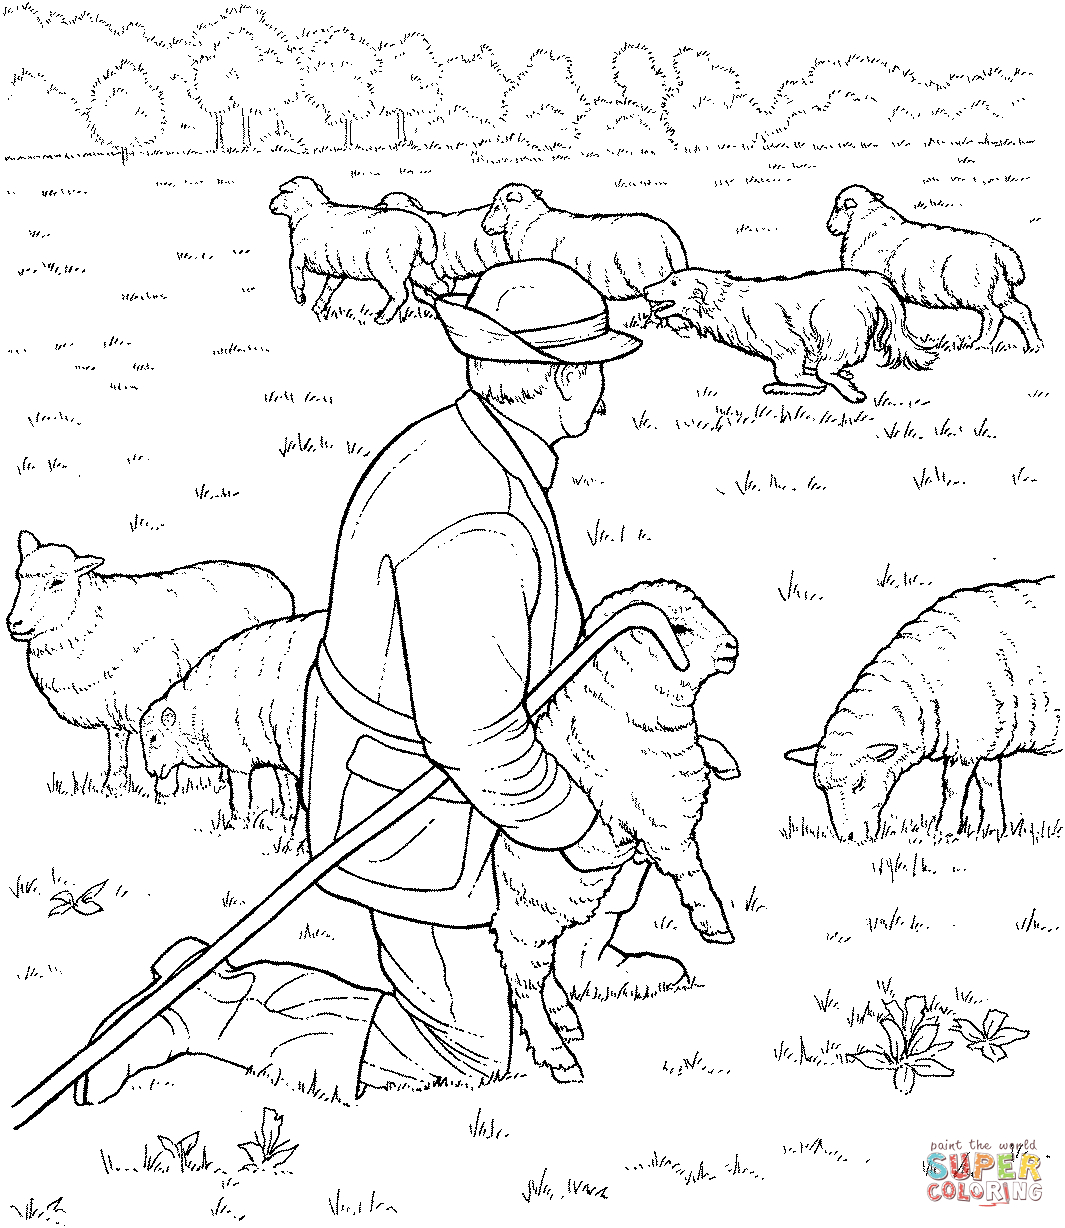 Coloring Pages Sheep And The Shepherd Sheep Herd And Shepherd Coloring Page Free Printable Coloring Pages